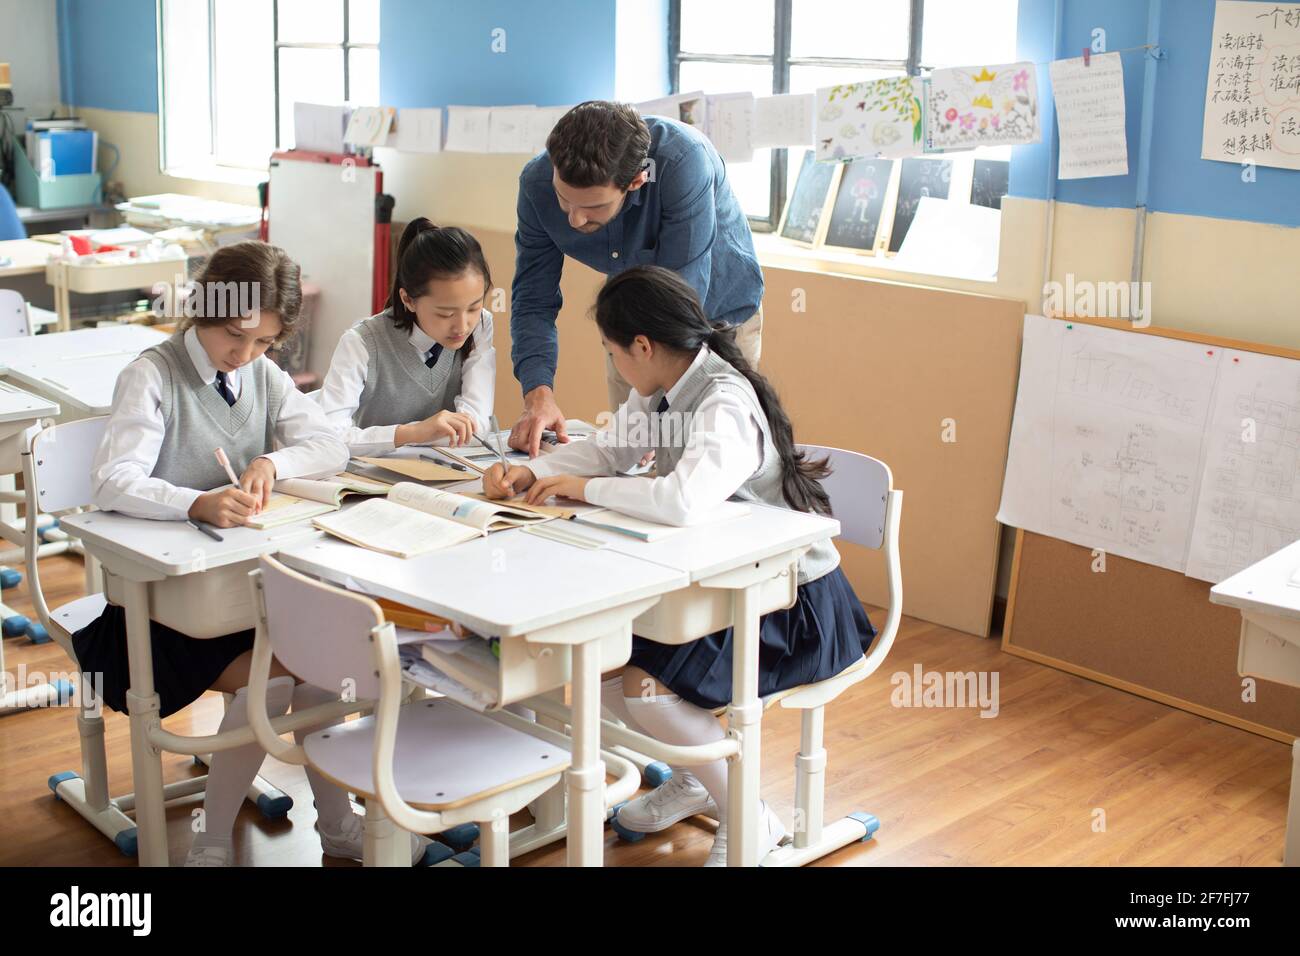 Young teacher helping students in classroom Stock Photo